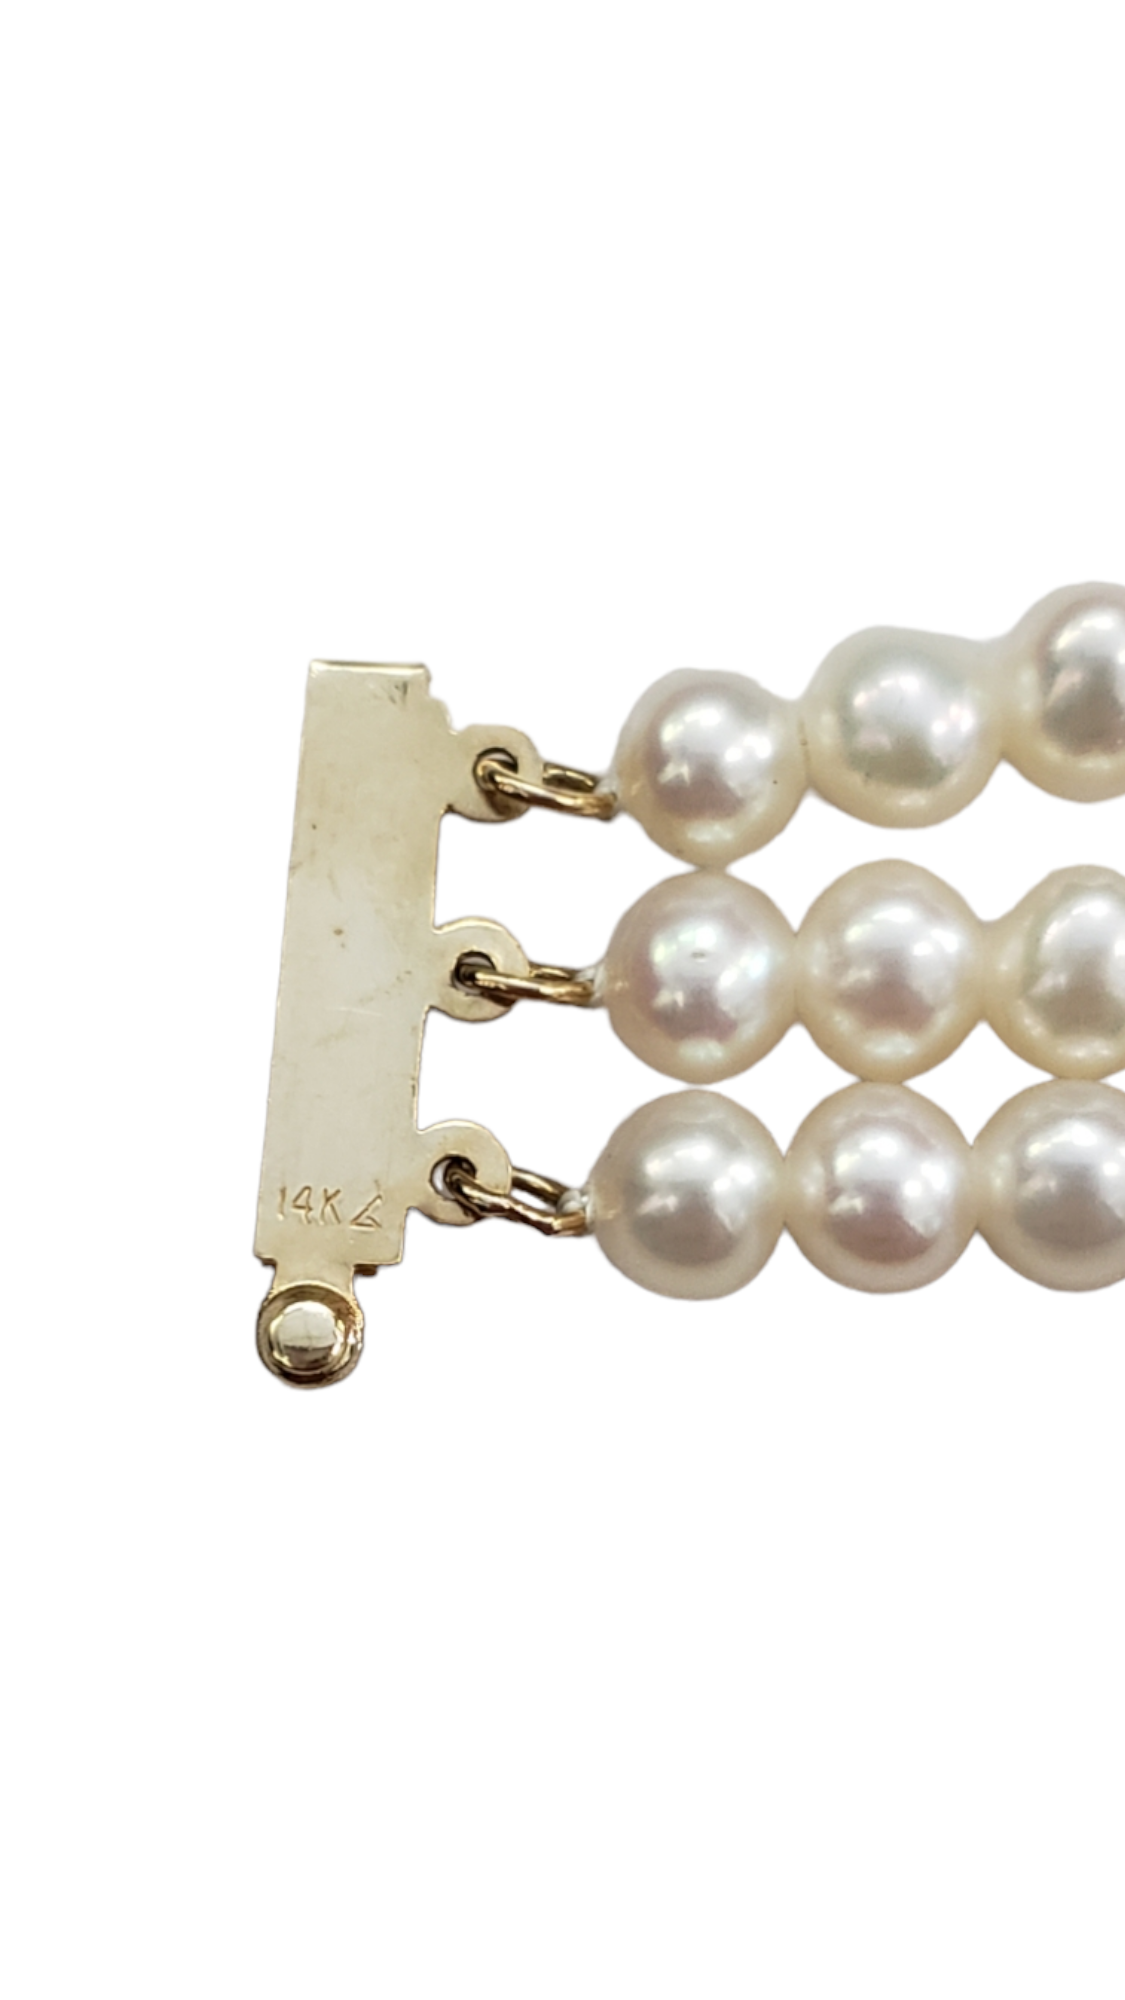 Cultured Triple Strand Pearl Bracelet with 14k Yellow Gold Slide Box clasp